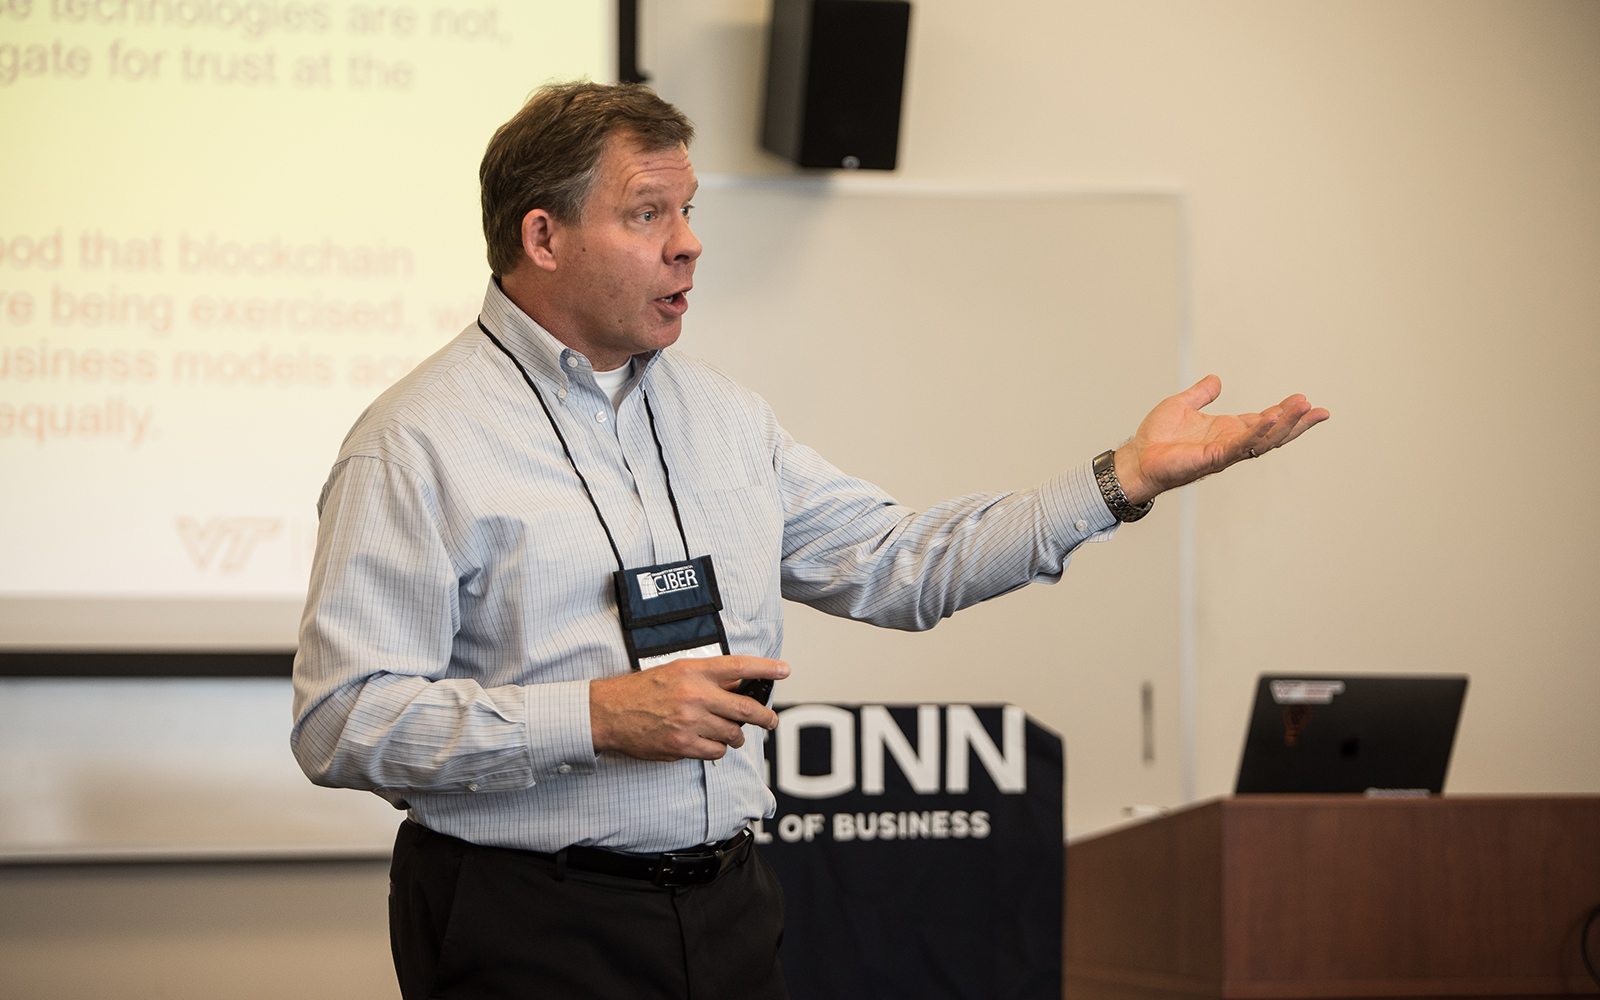 Mark Mondry, a professor at Virginia Tech, discusses his research on Blockchain and trust concerns in transactional organizations. (Nathan Oldham/UConn School of Business)